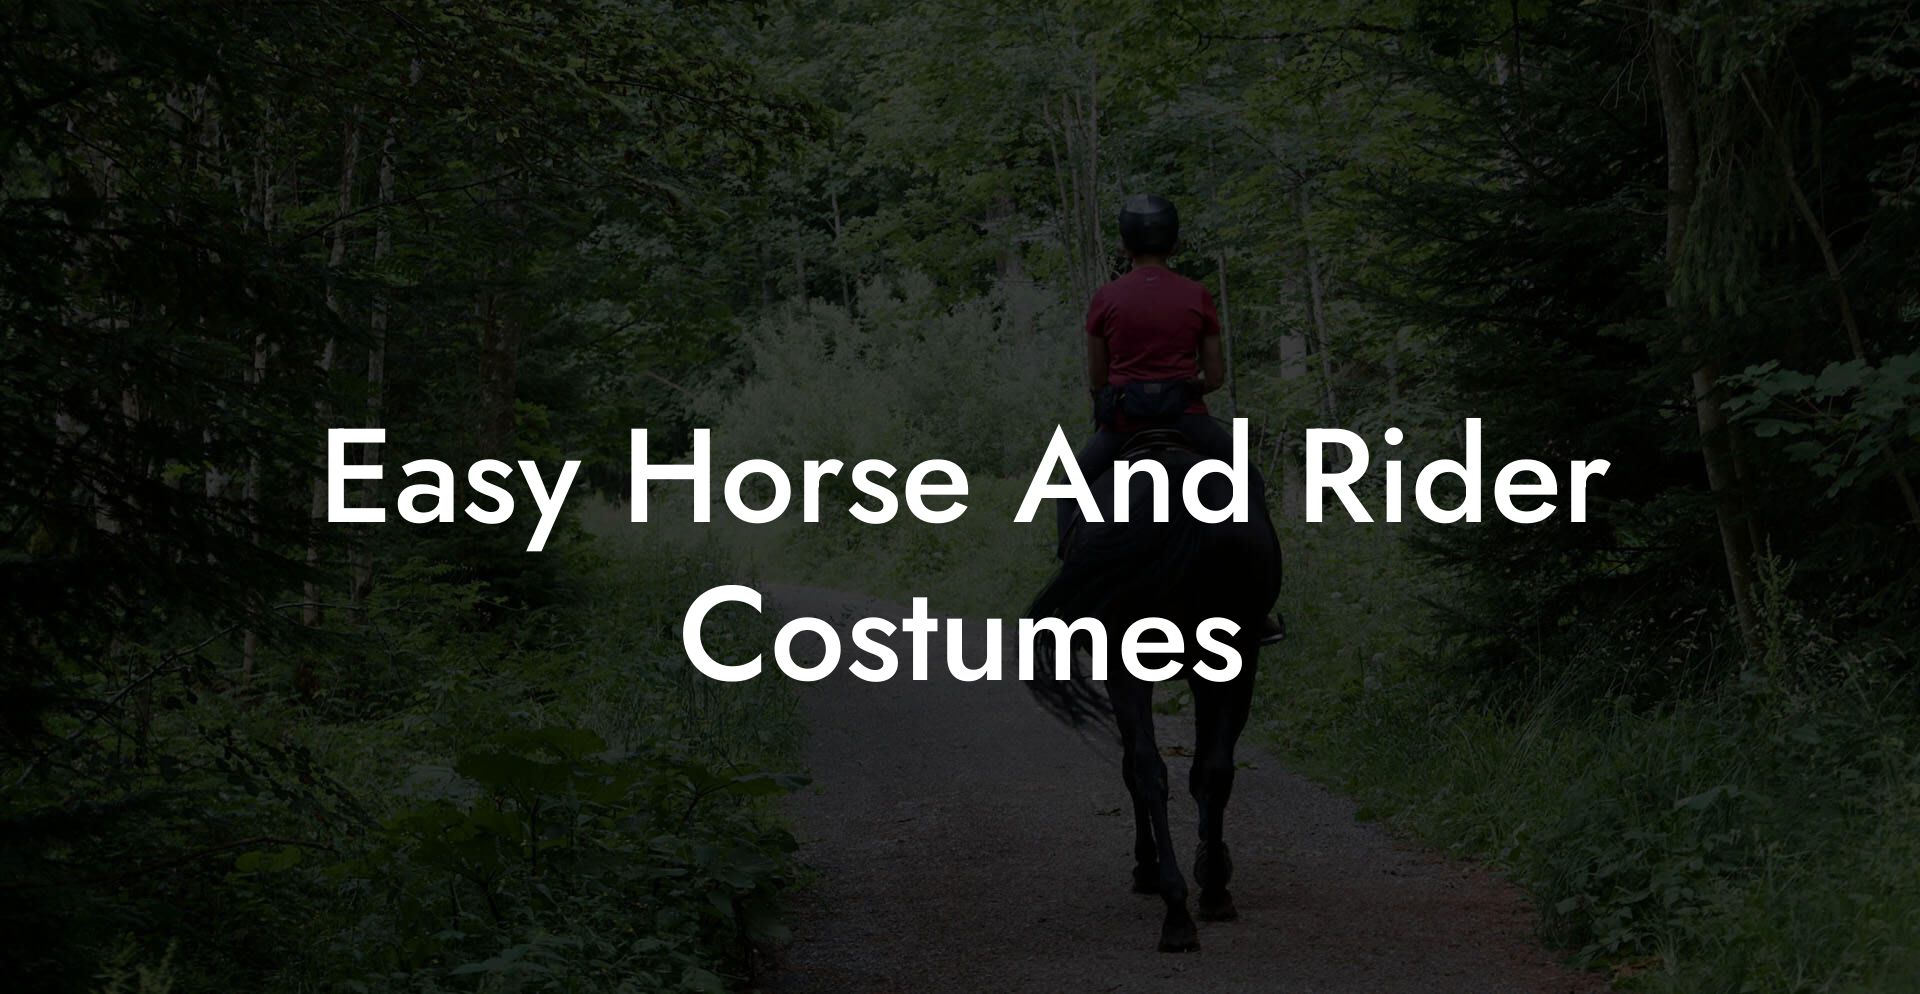 Easy Horse And Rider Costumes